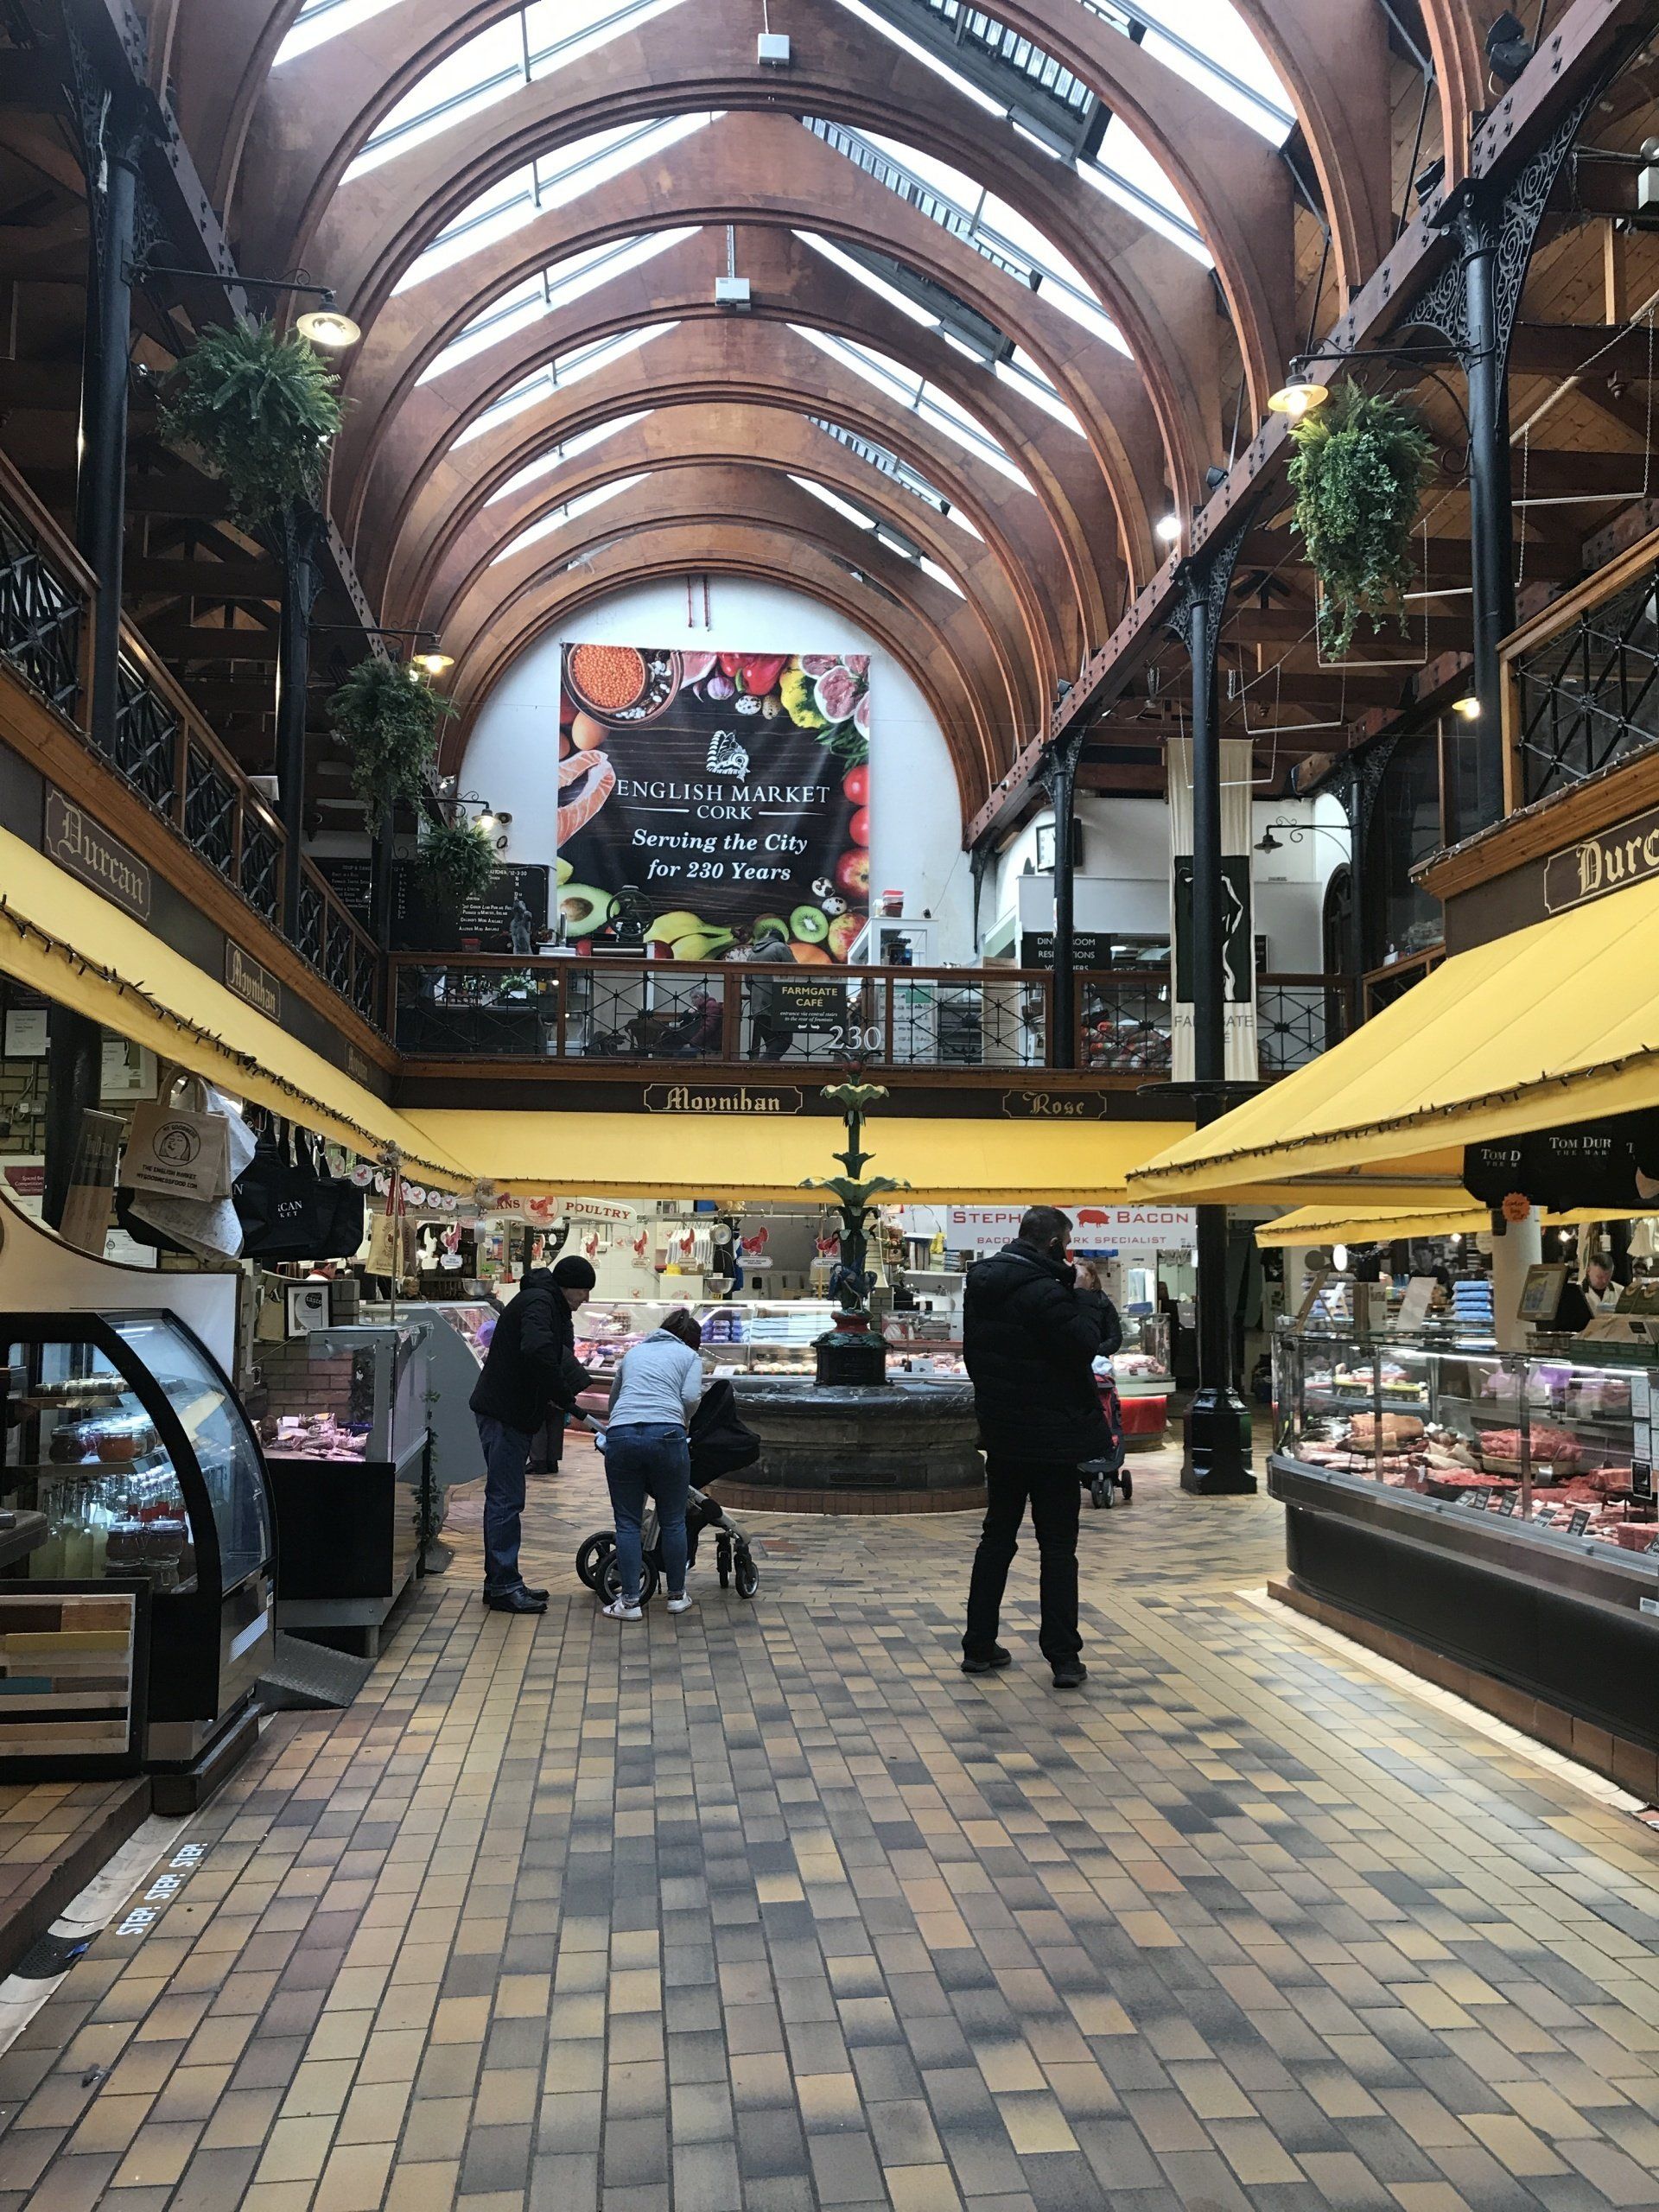 The English Market in the heart of Cork City